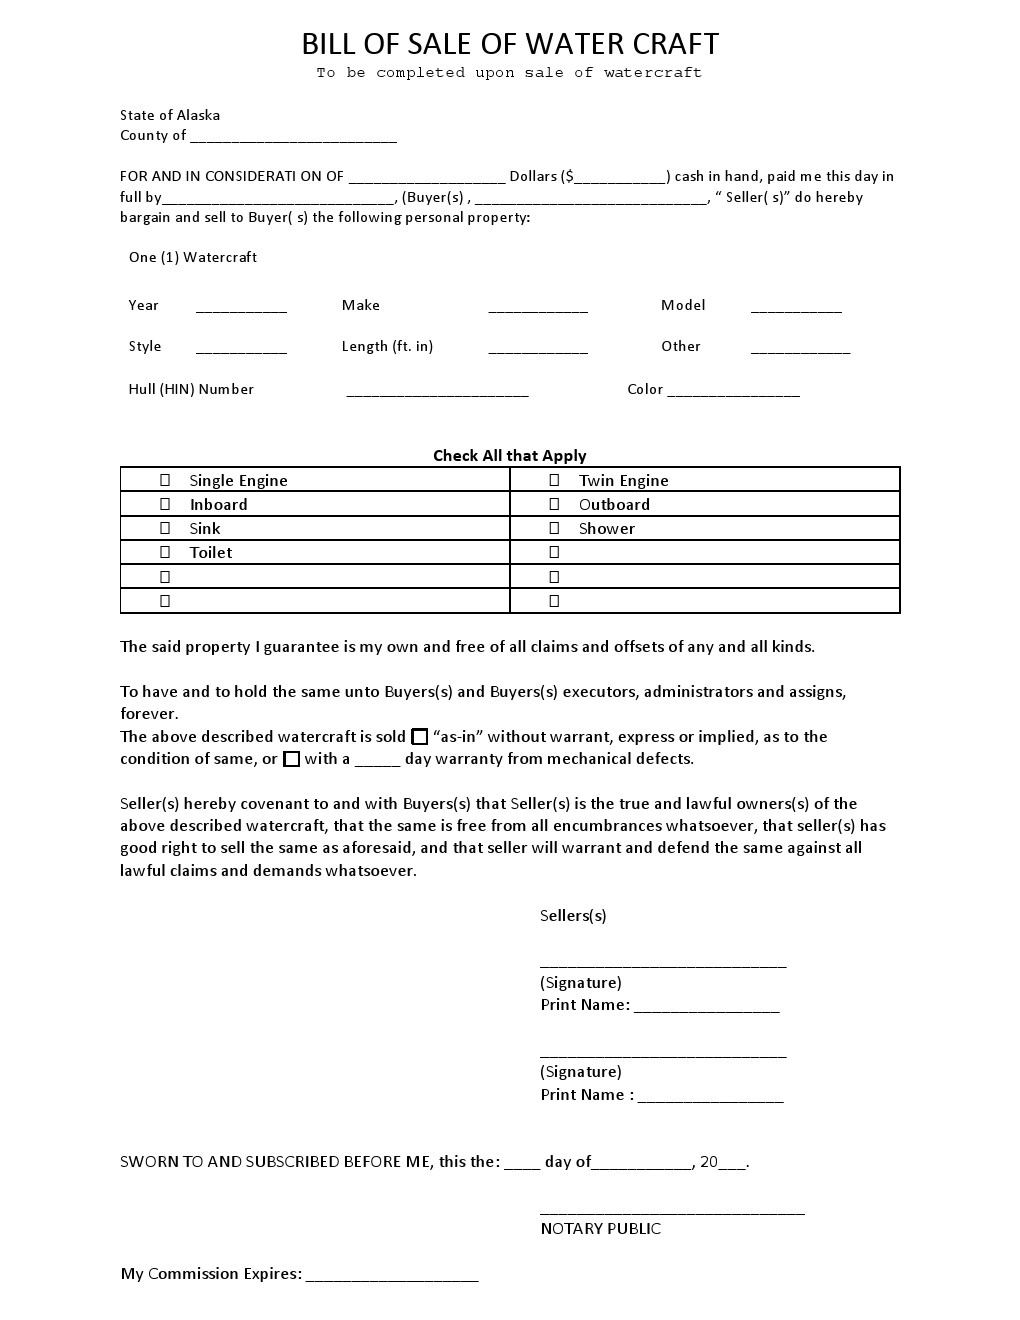 notarized bill of sale template